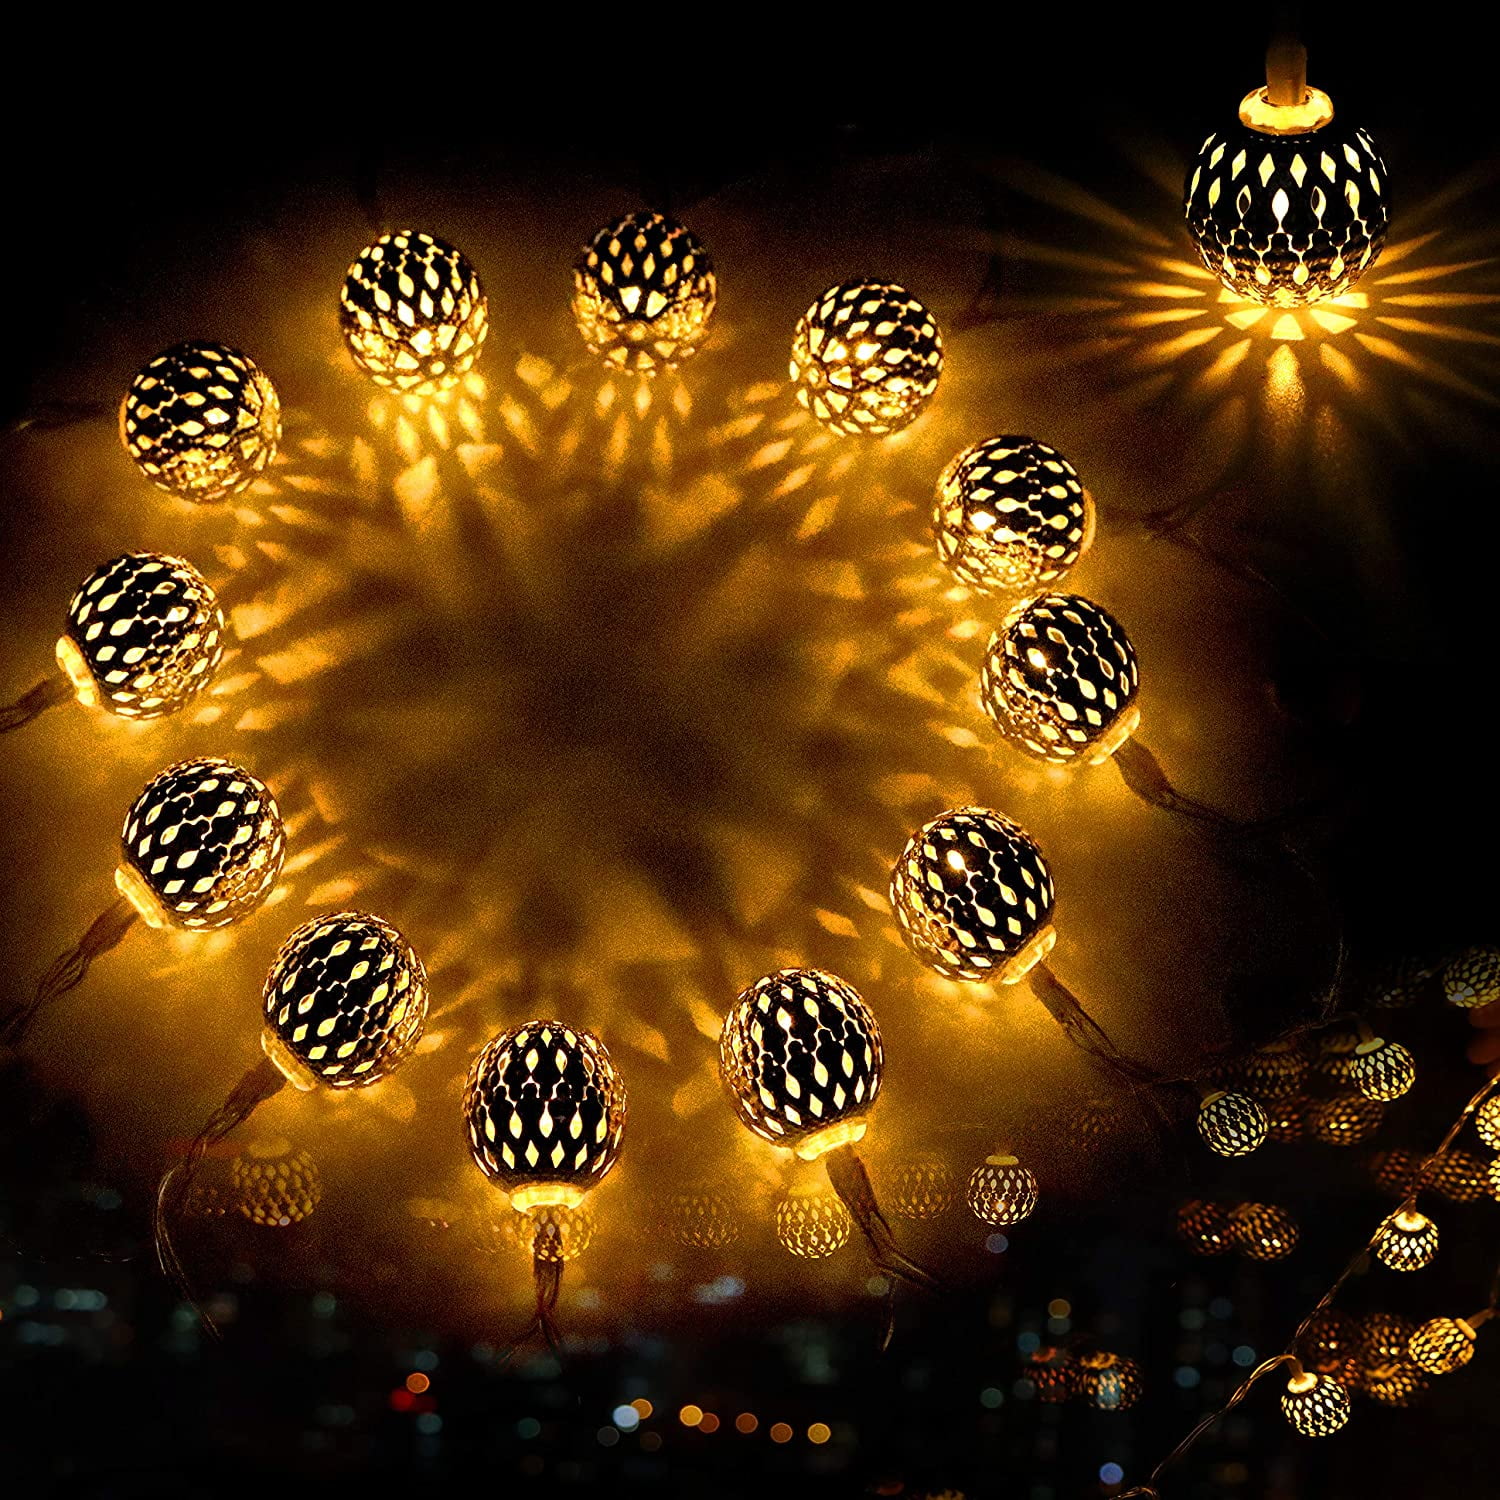 Details about   40LED Christmas String Lights Fairy Morocco Ball LED Wedding Xmas Party Decors 